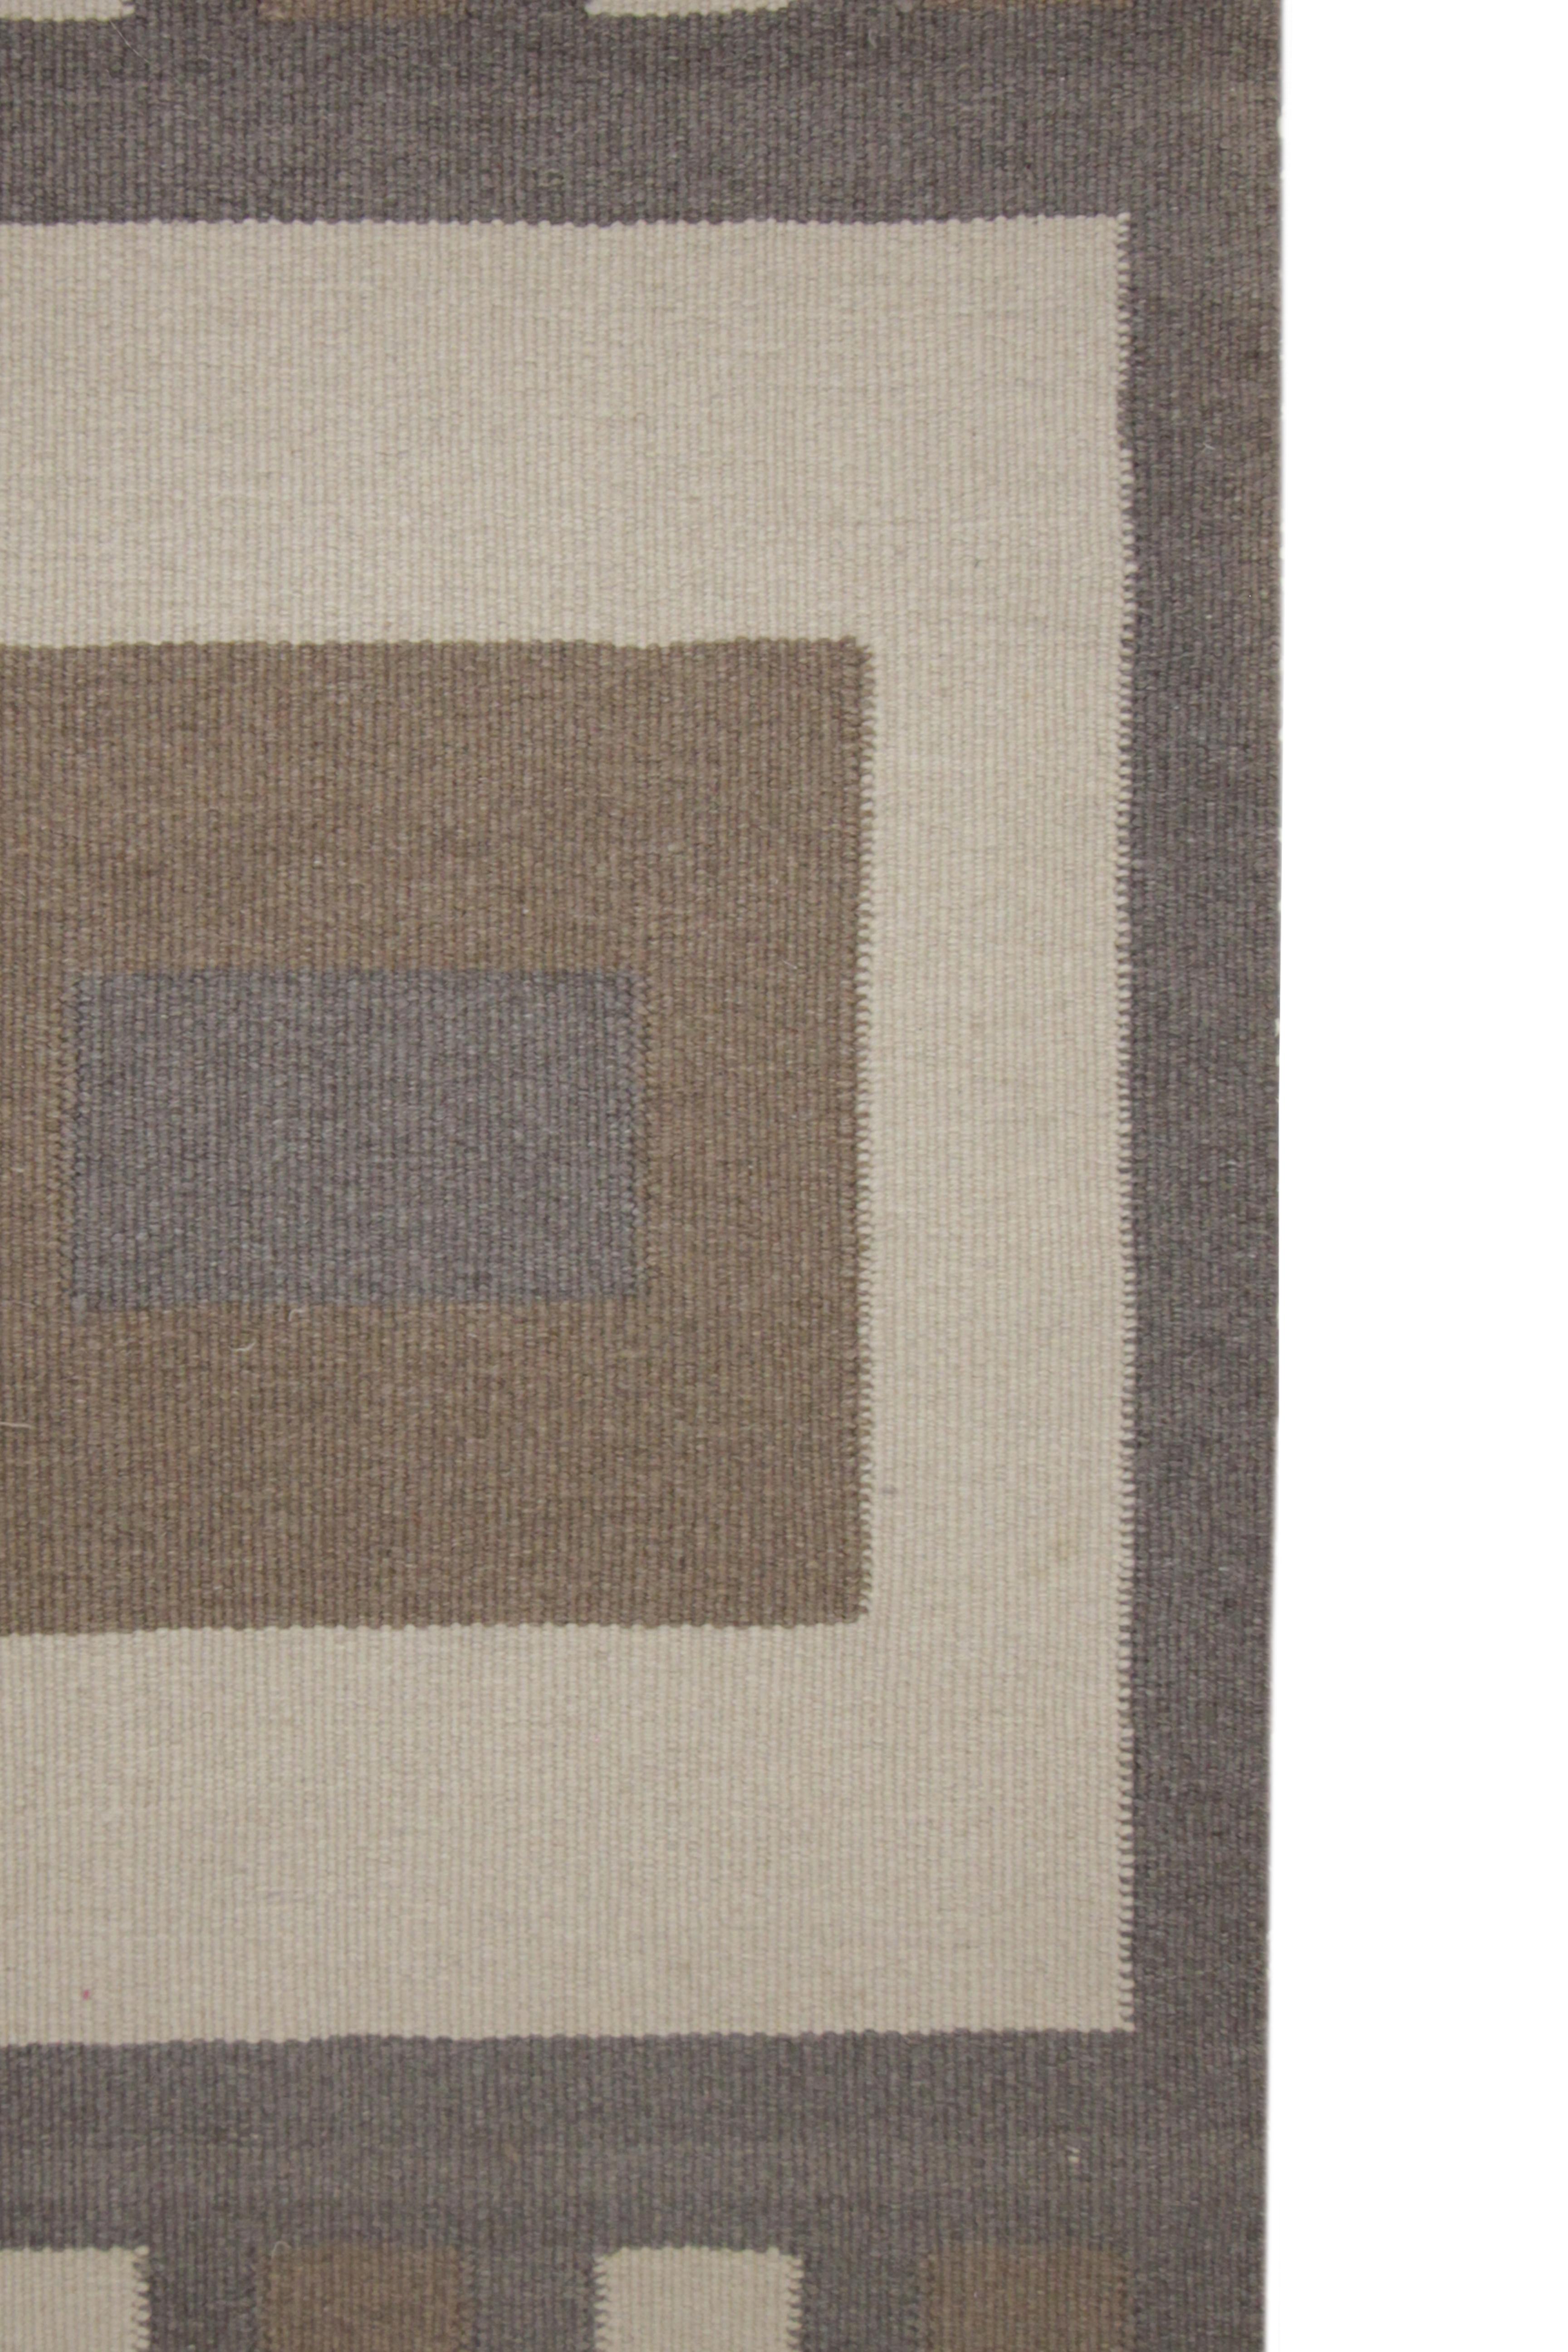 This fine wool mat is the perfect front or back door accessory. Woven by hand with fine wool and cotton that has been dyed with organic vegetable dyeing techniques. The design features a simple beige background with a modern square stripe design.